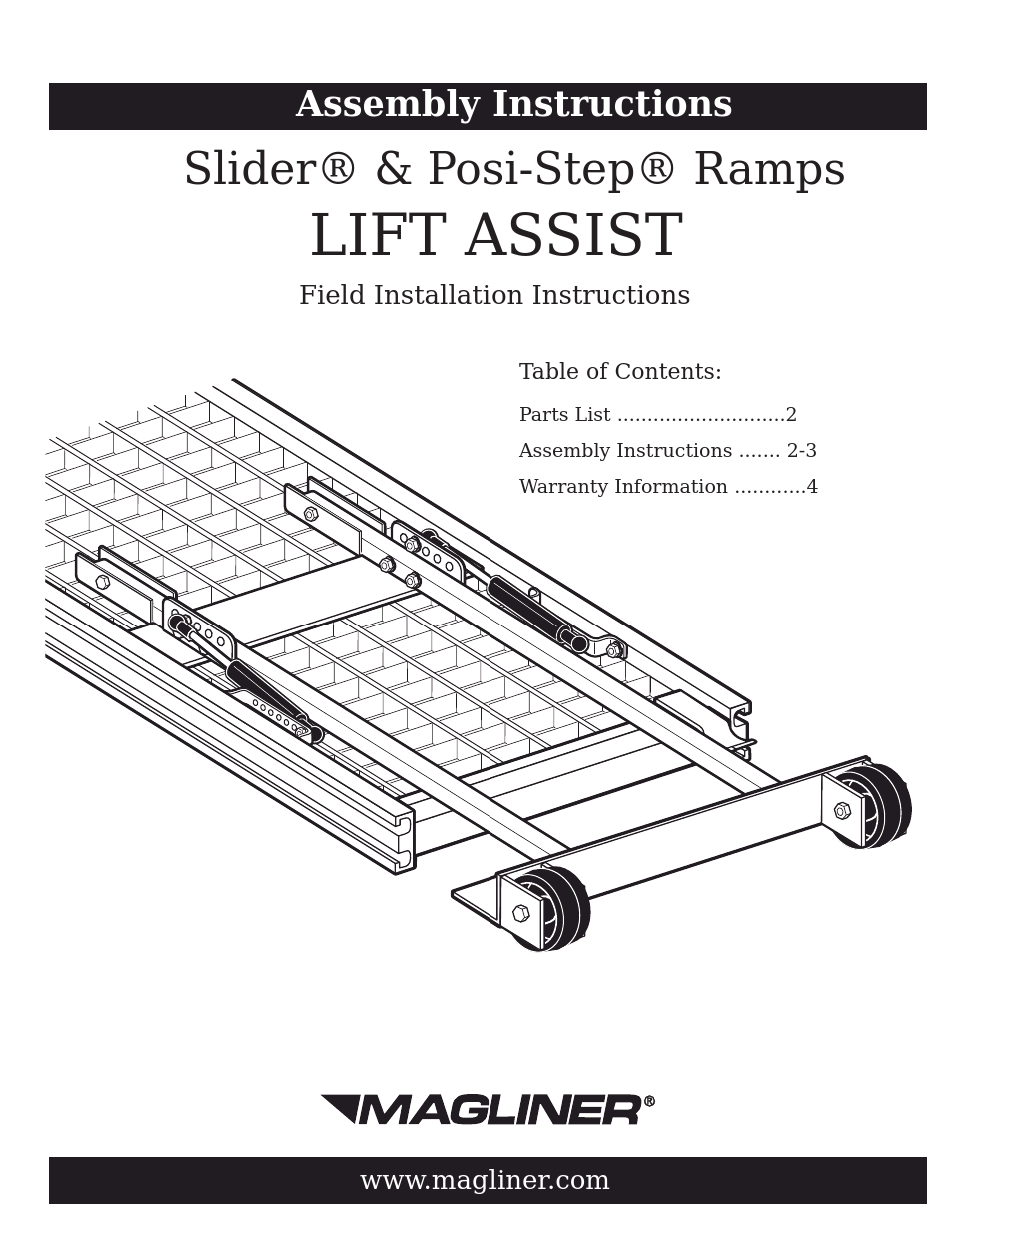 LIFT ASSIST FOR RAMPS